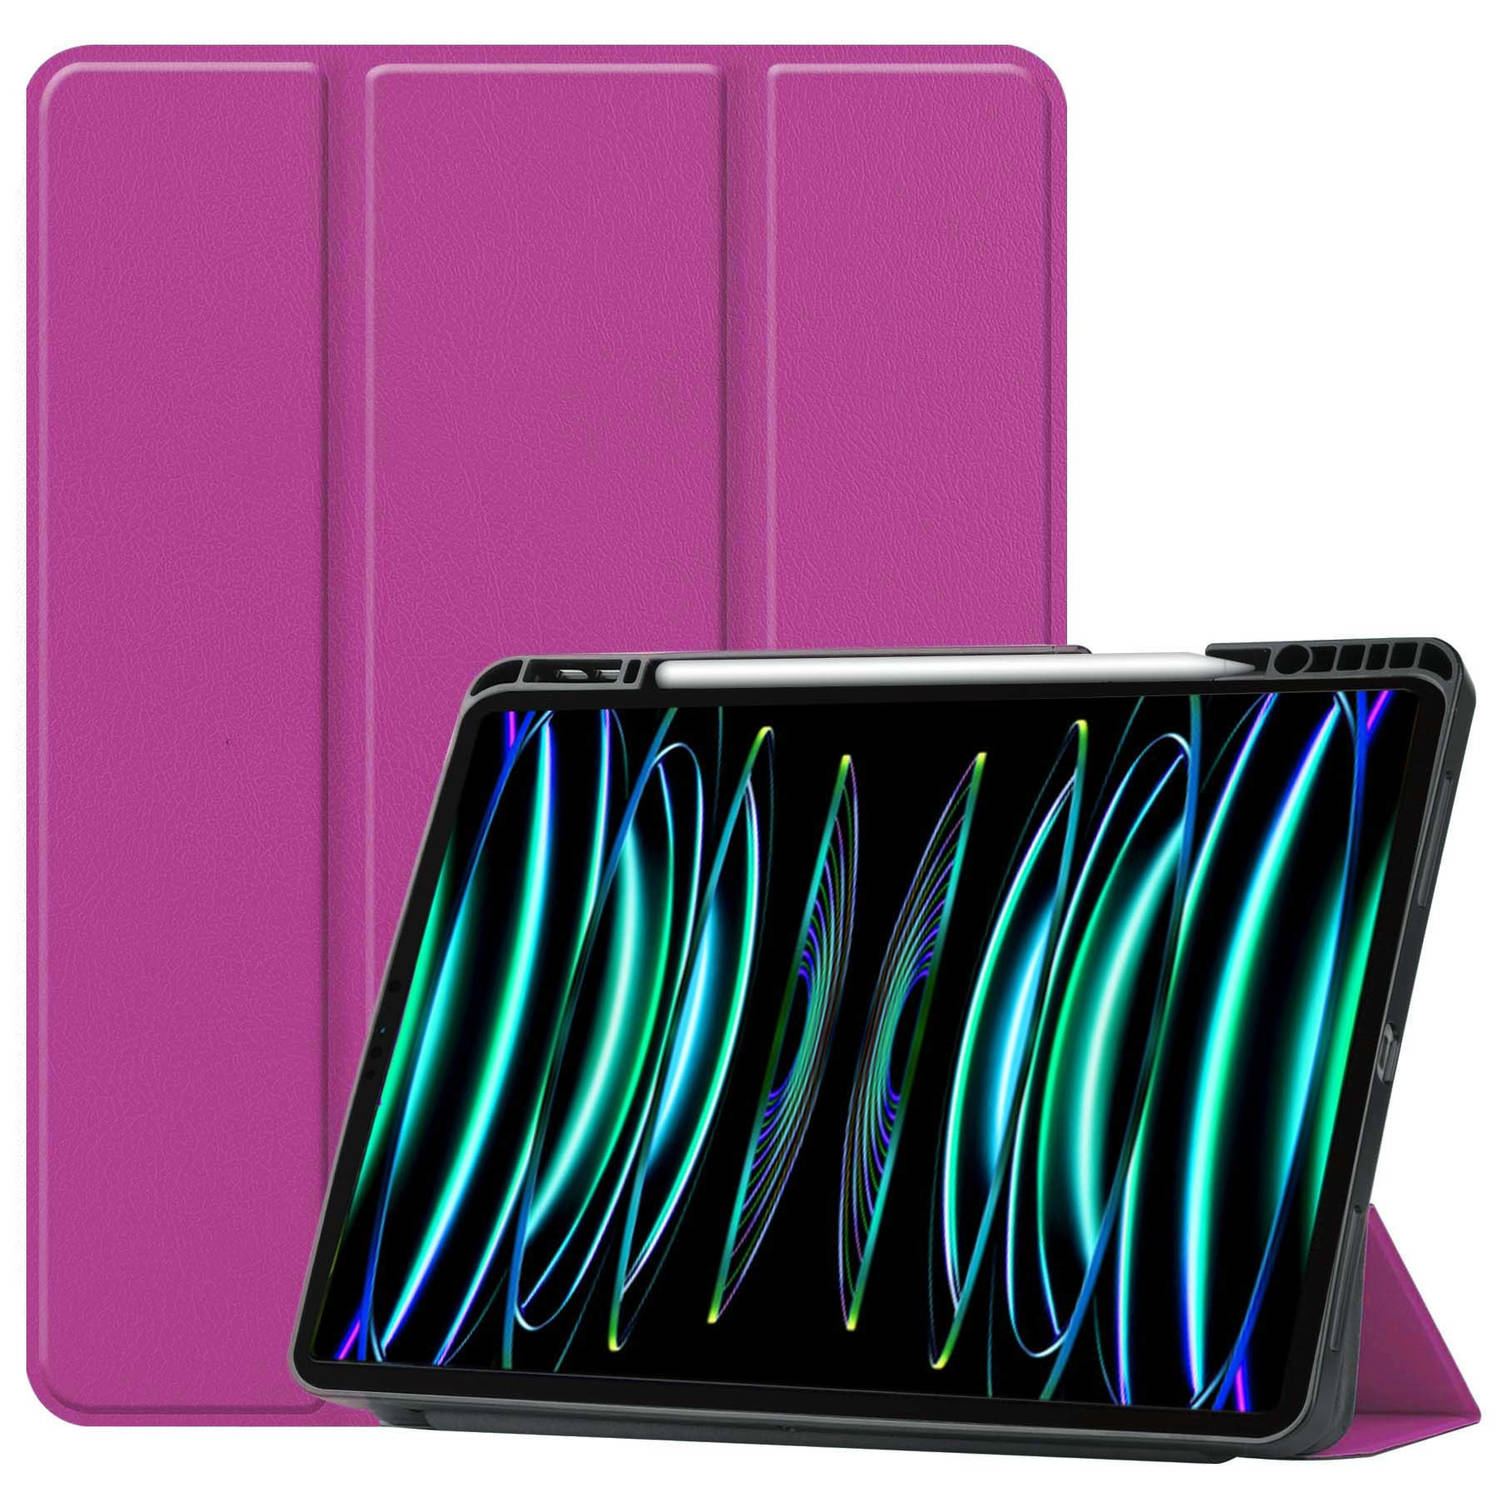 Basey Ipad Pro 2021 11 Inch Hoes Case Hoesje Paars Uitsparing Apple Pencil